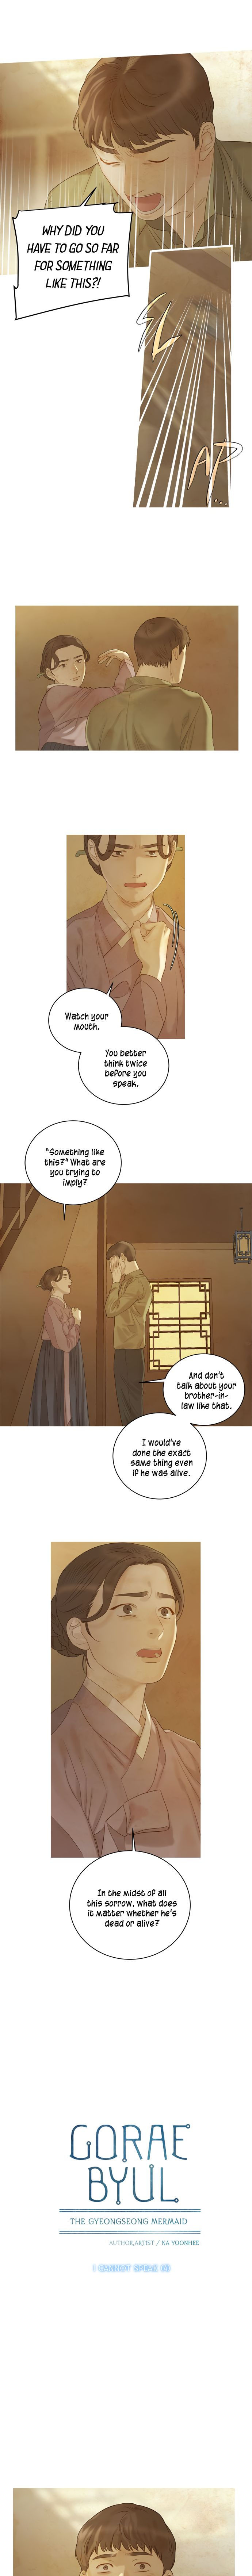 Gorae Byul - The Gyeongseong Mermaid - Chapter 21 Page 3